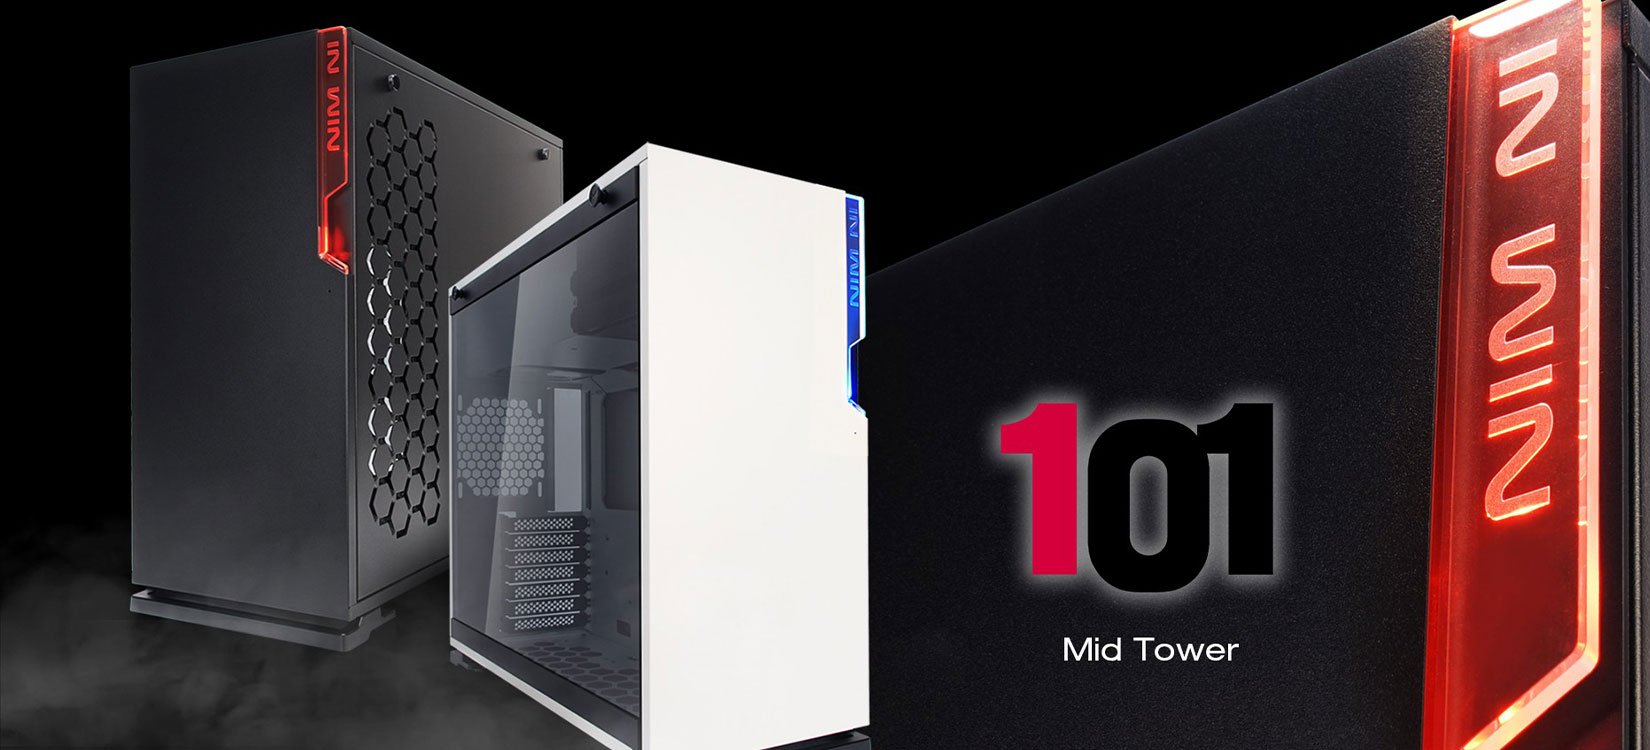 Gioi-Thieu-vo-case-inwin-101-black-full-side-tempered-glass-mid-tower-mau-den